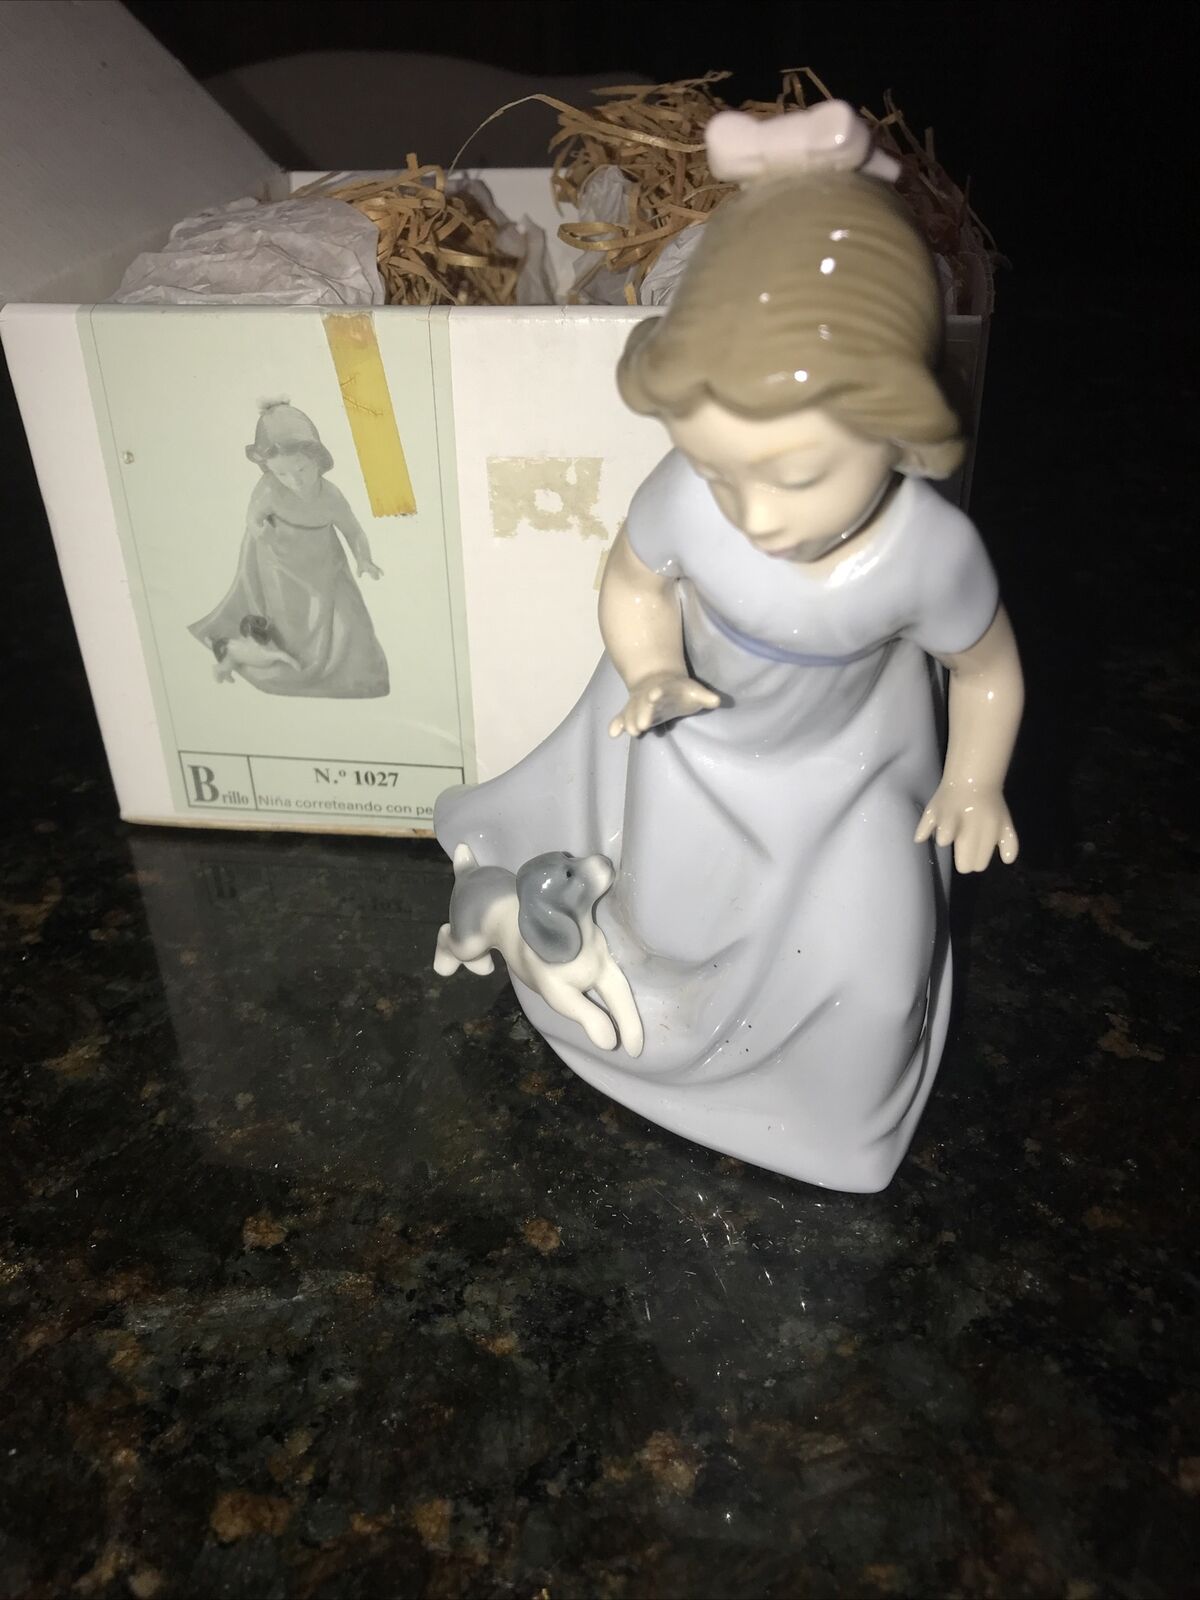 NAO by Lladro Play Time Figurine of a Young Girl & Her Puppy - Retired 1027 NIB